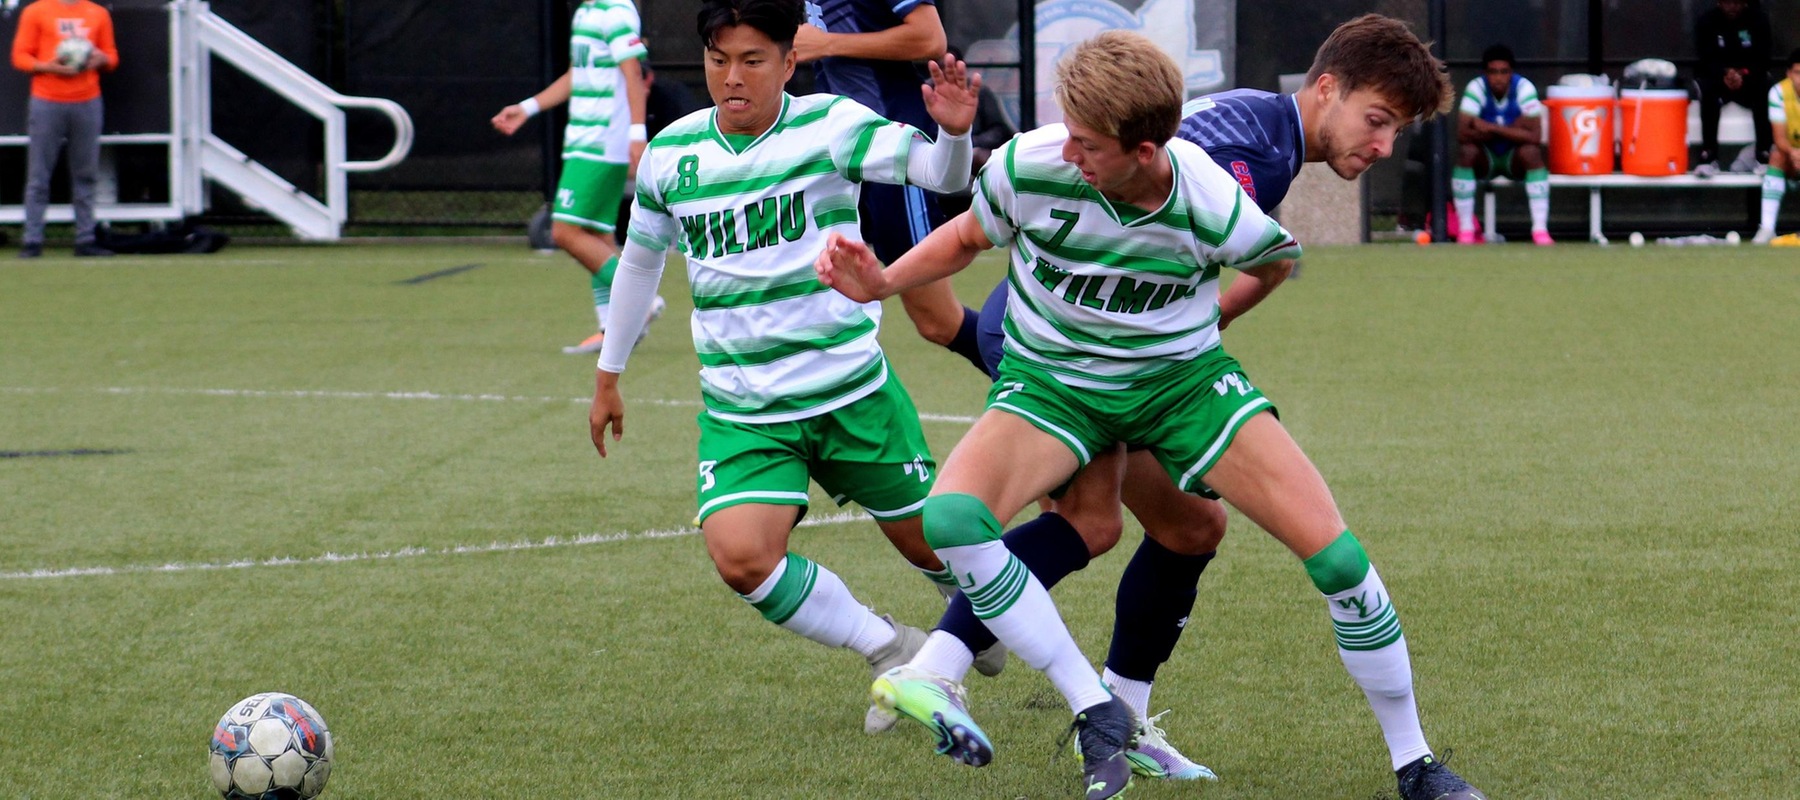 File photo of Yohan Kim (8) who scored the first goal and Marius Skattum Dahl (7) had two assists at Georgian Court. Wilmington University’s Yohan Kim (8) and Marius Skattum Dahl (7) get the ball away from Jefferson University  during their Men’s NCAA soccer match at the Wilmington University Sports complex in Newark, Delaware, September 28, 2022. Photo By Alexa Coney